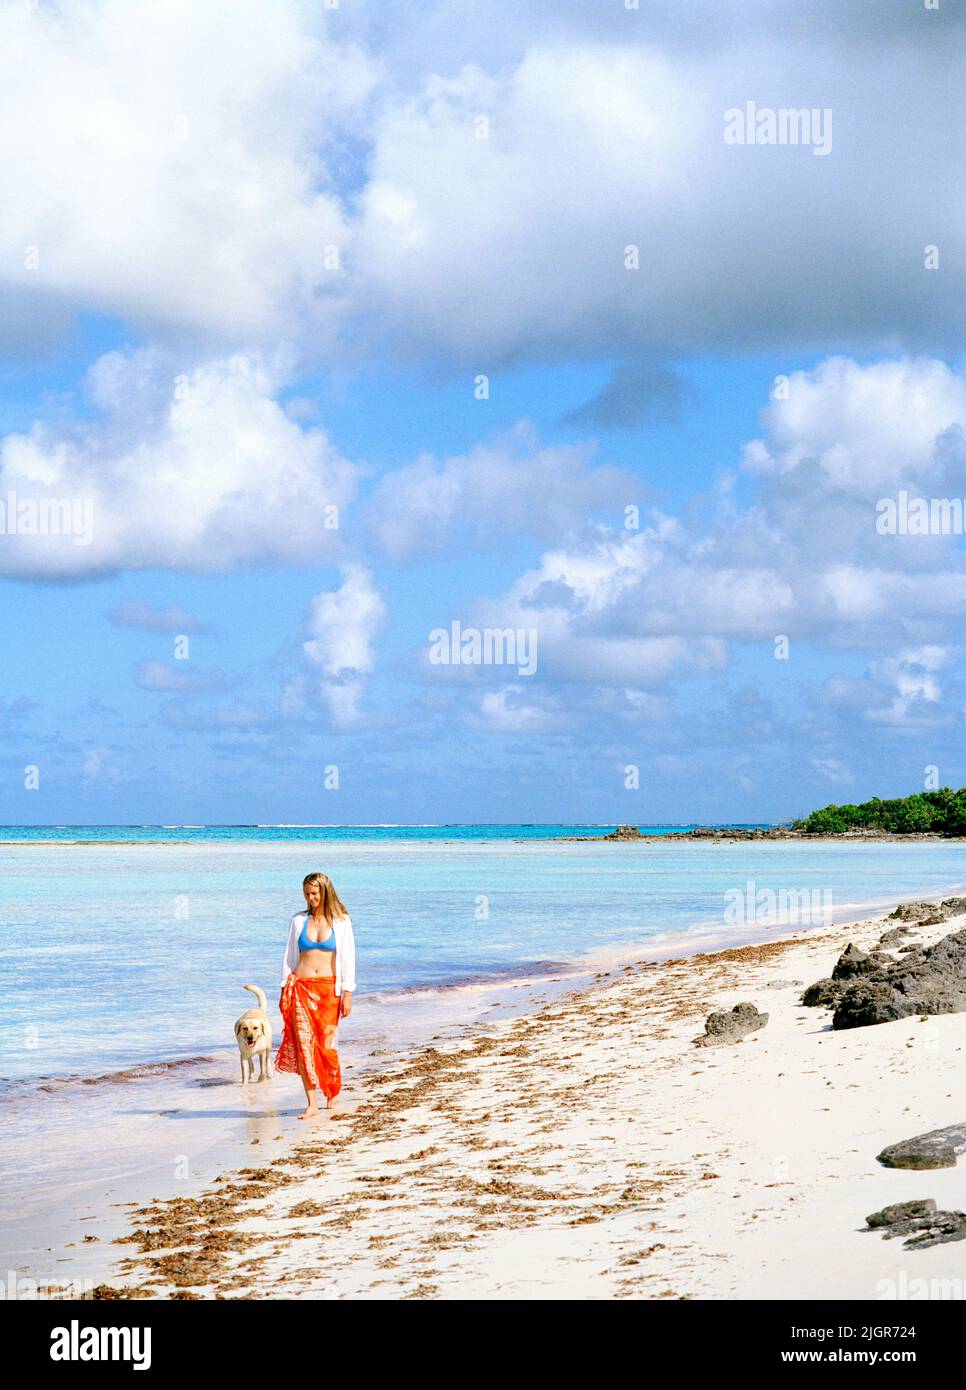 Woman walking on beach with dog, Turks and Caicos Stock Photo